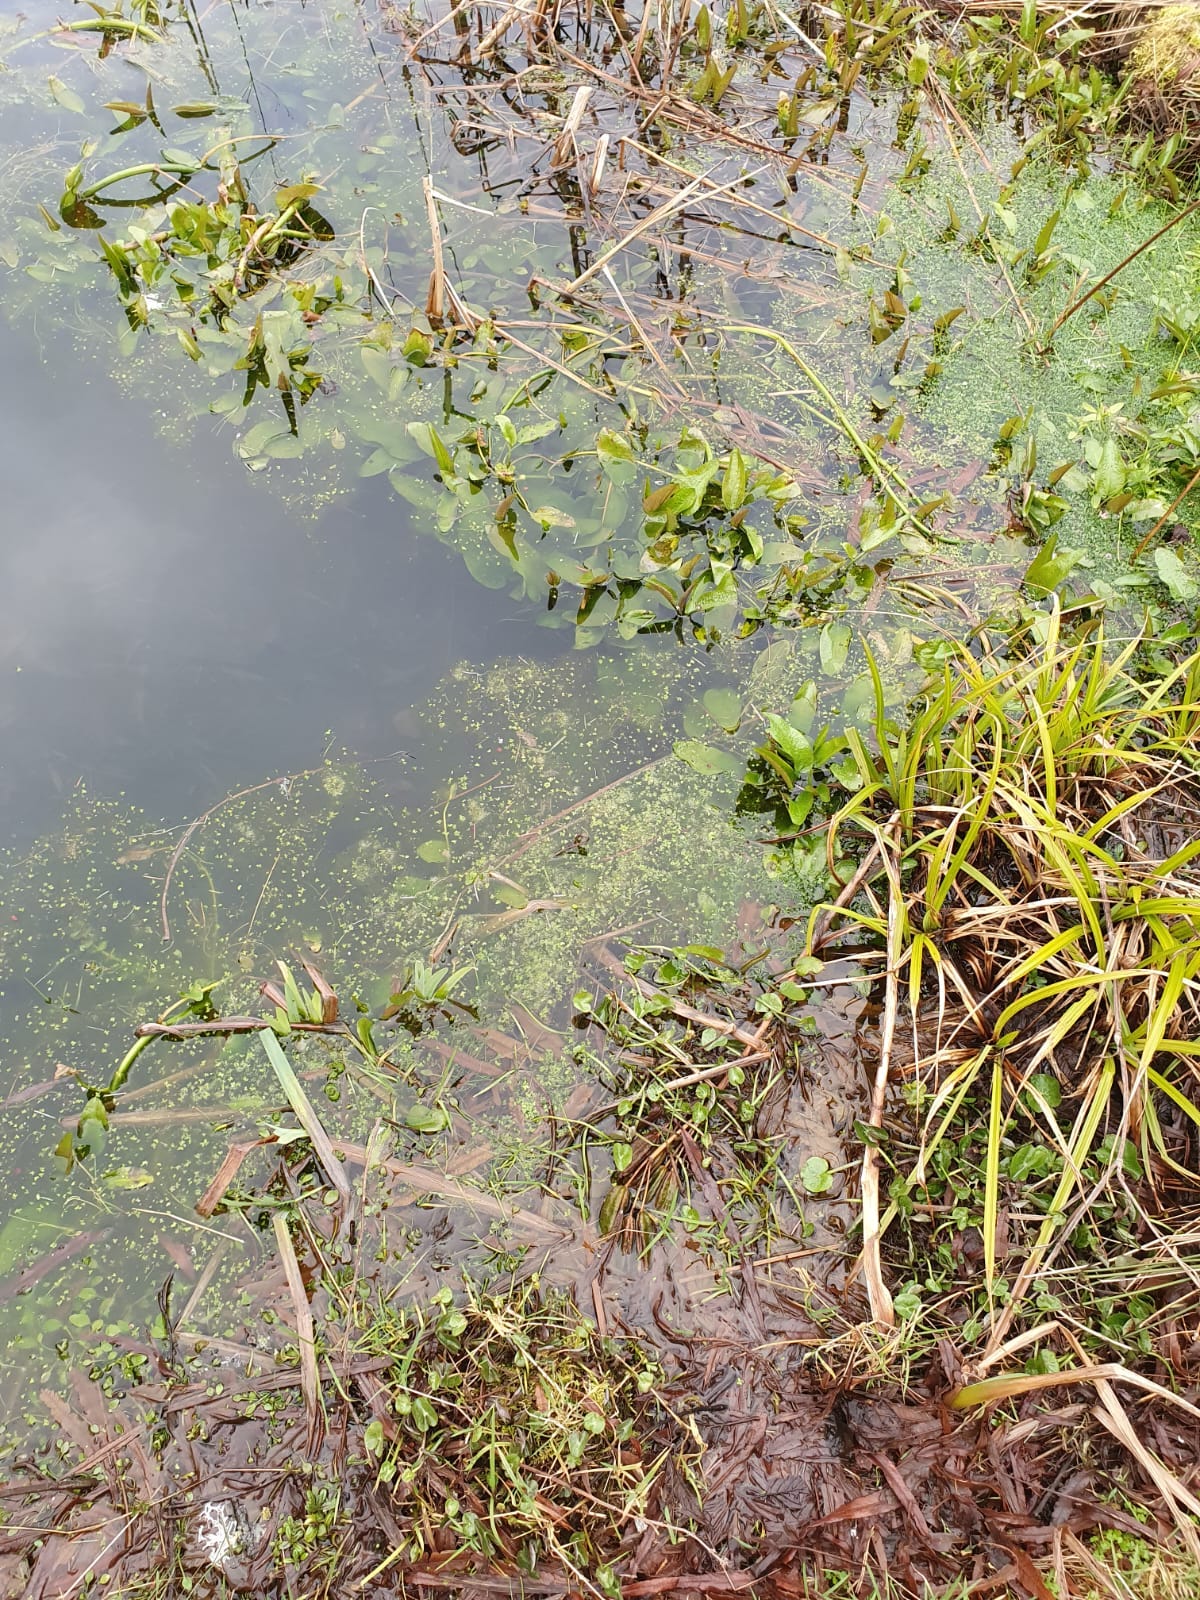 pond's edge: there is duckweed, bulrushes, algae, and some other plants i can't identify